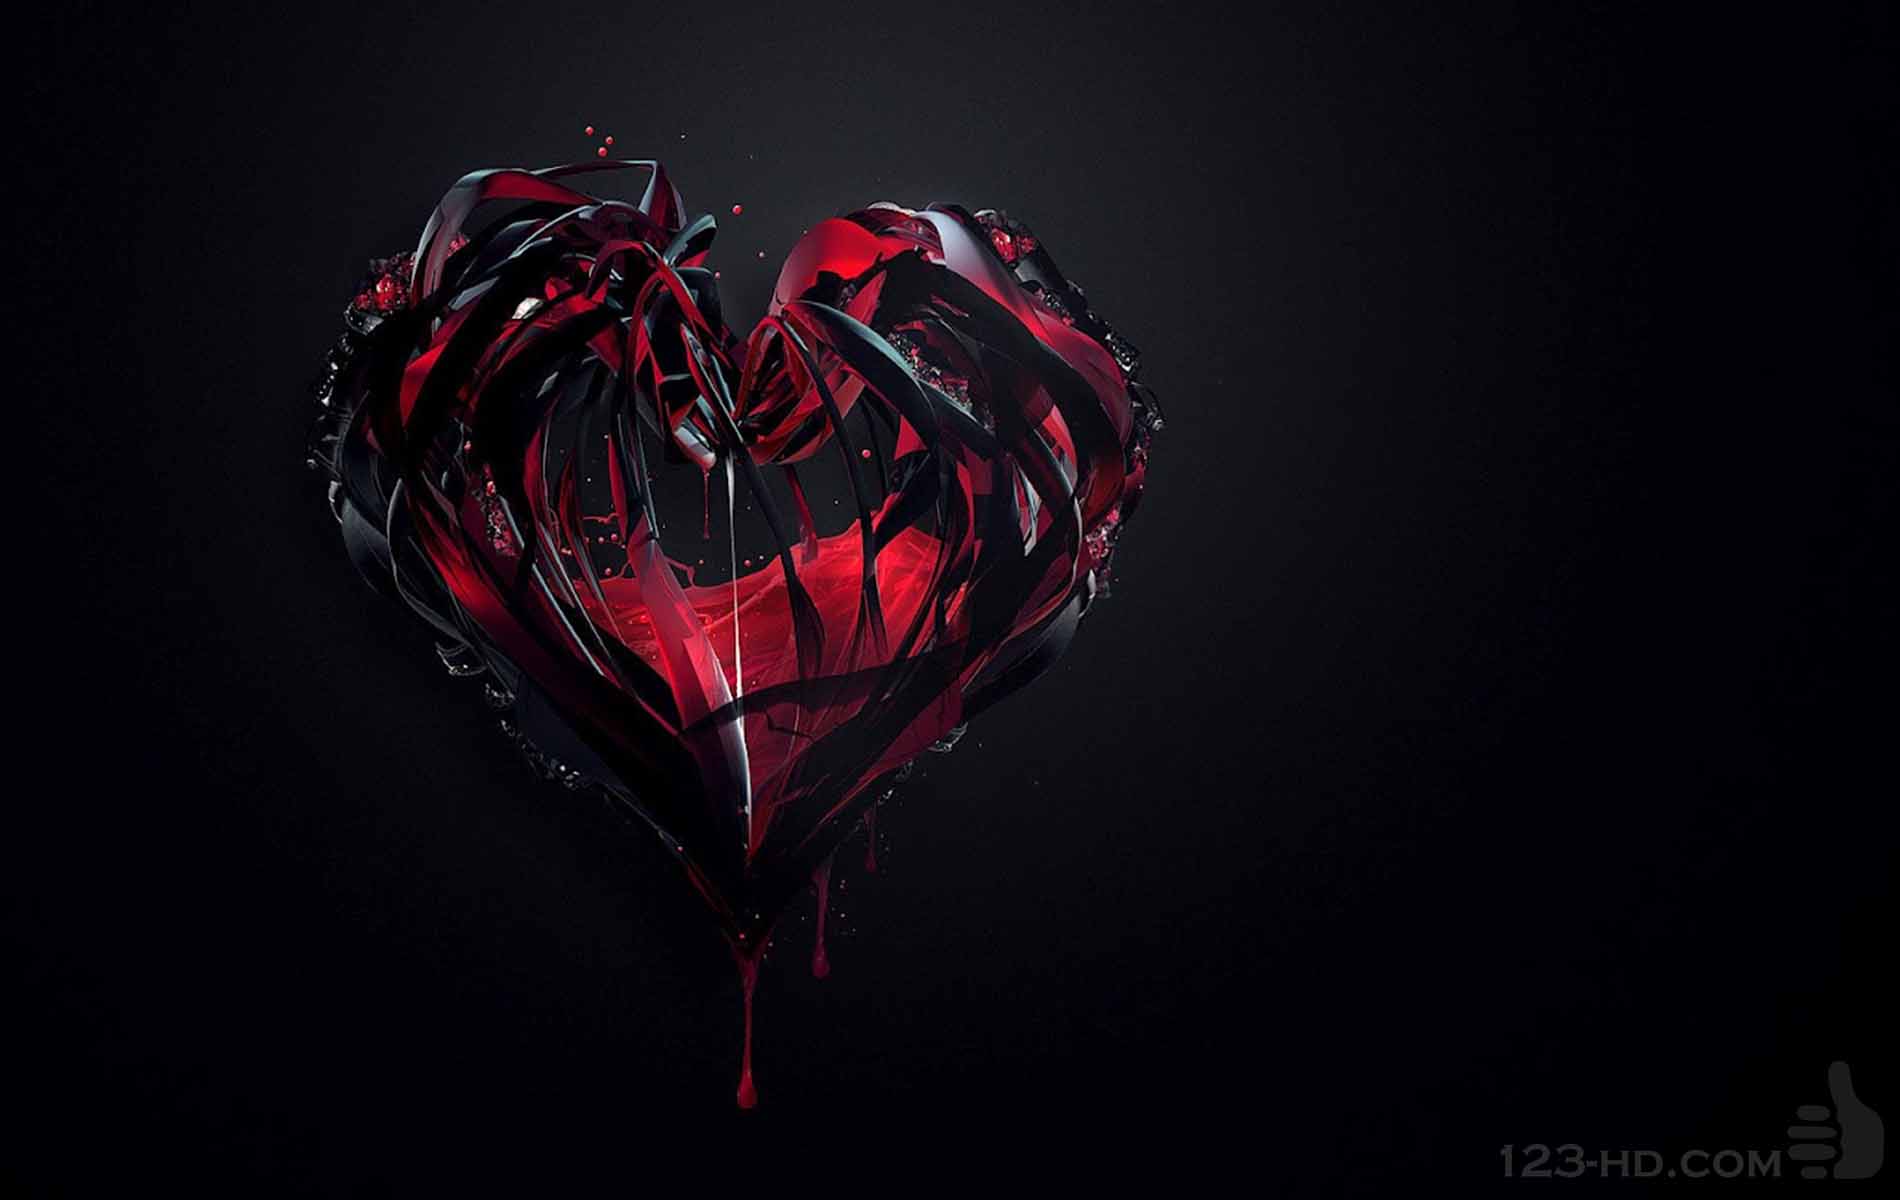 Wallpaper Hd Dark Heart With Wings Background, Heart With Wings Pictures  Background Image And Wallpaper for Free Download